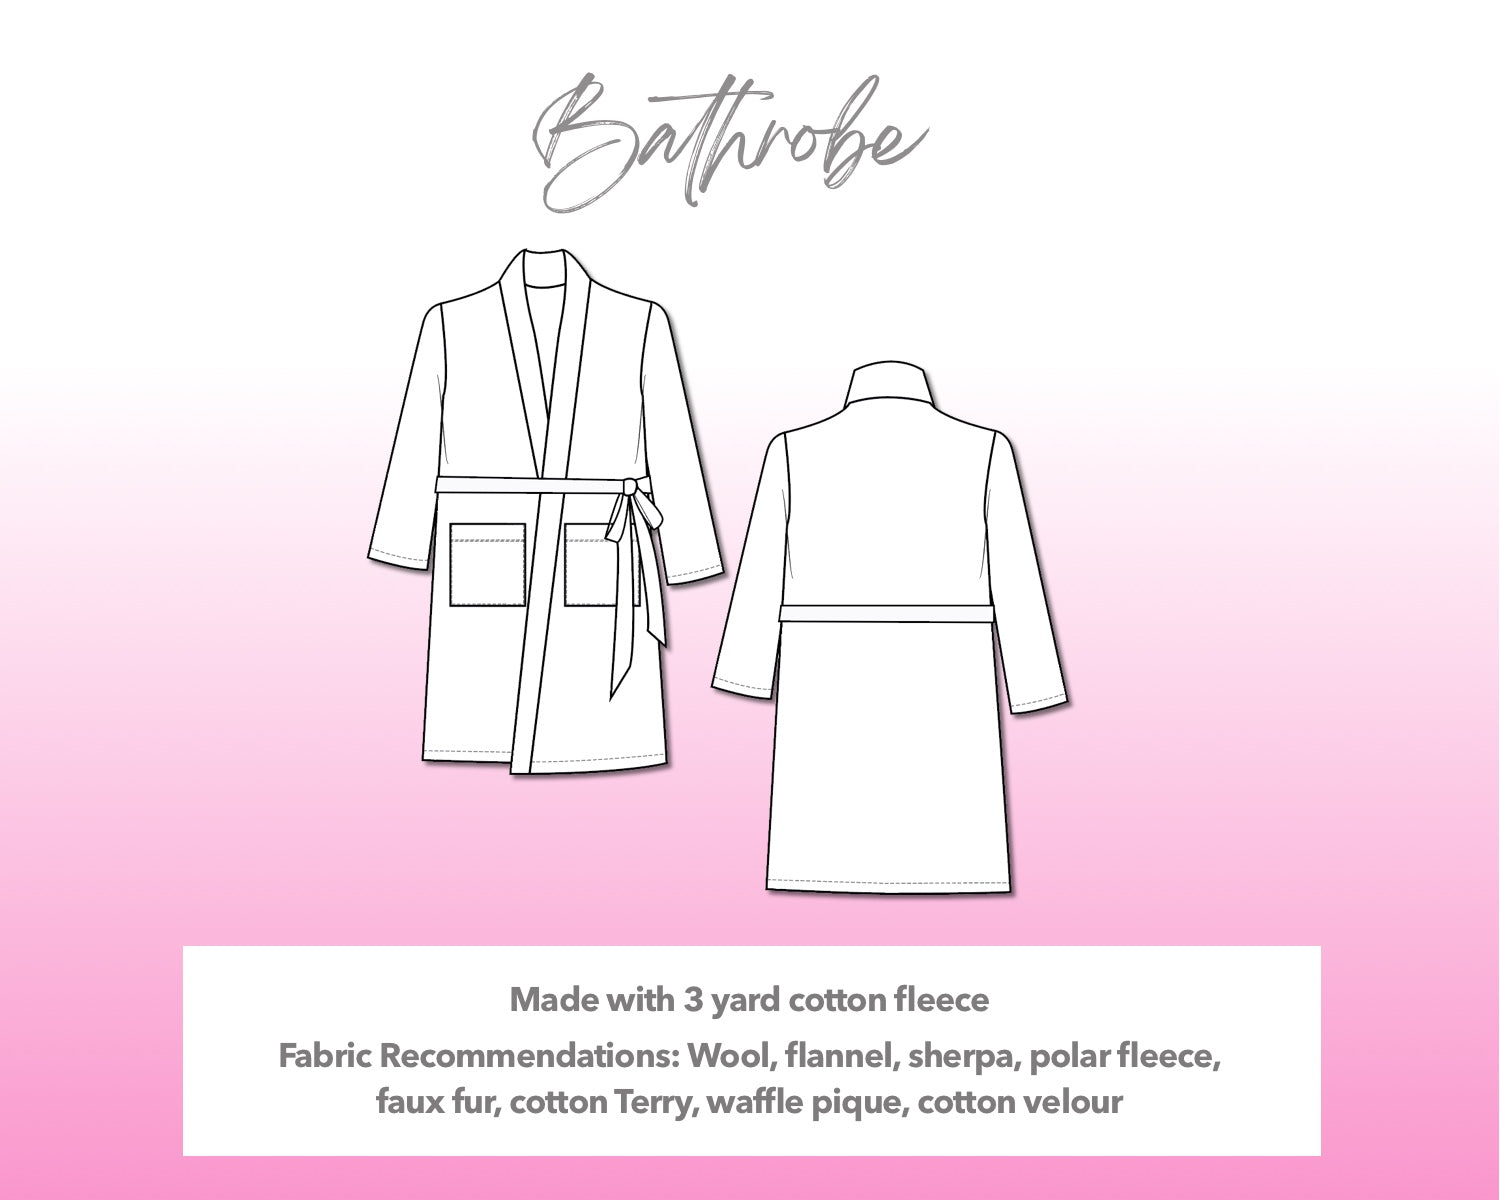 Illustration and detailed description for Bathrobe sewing pattern.